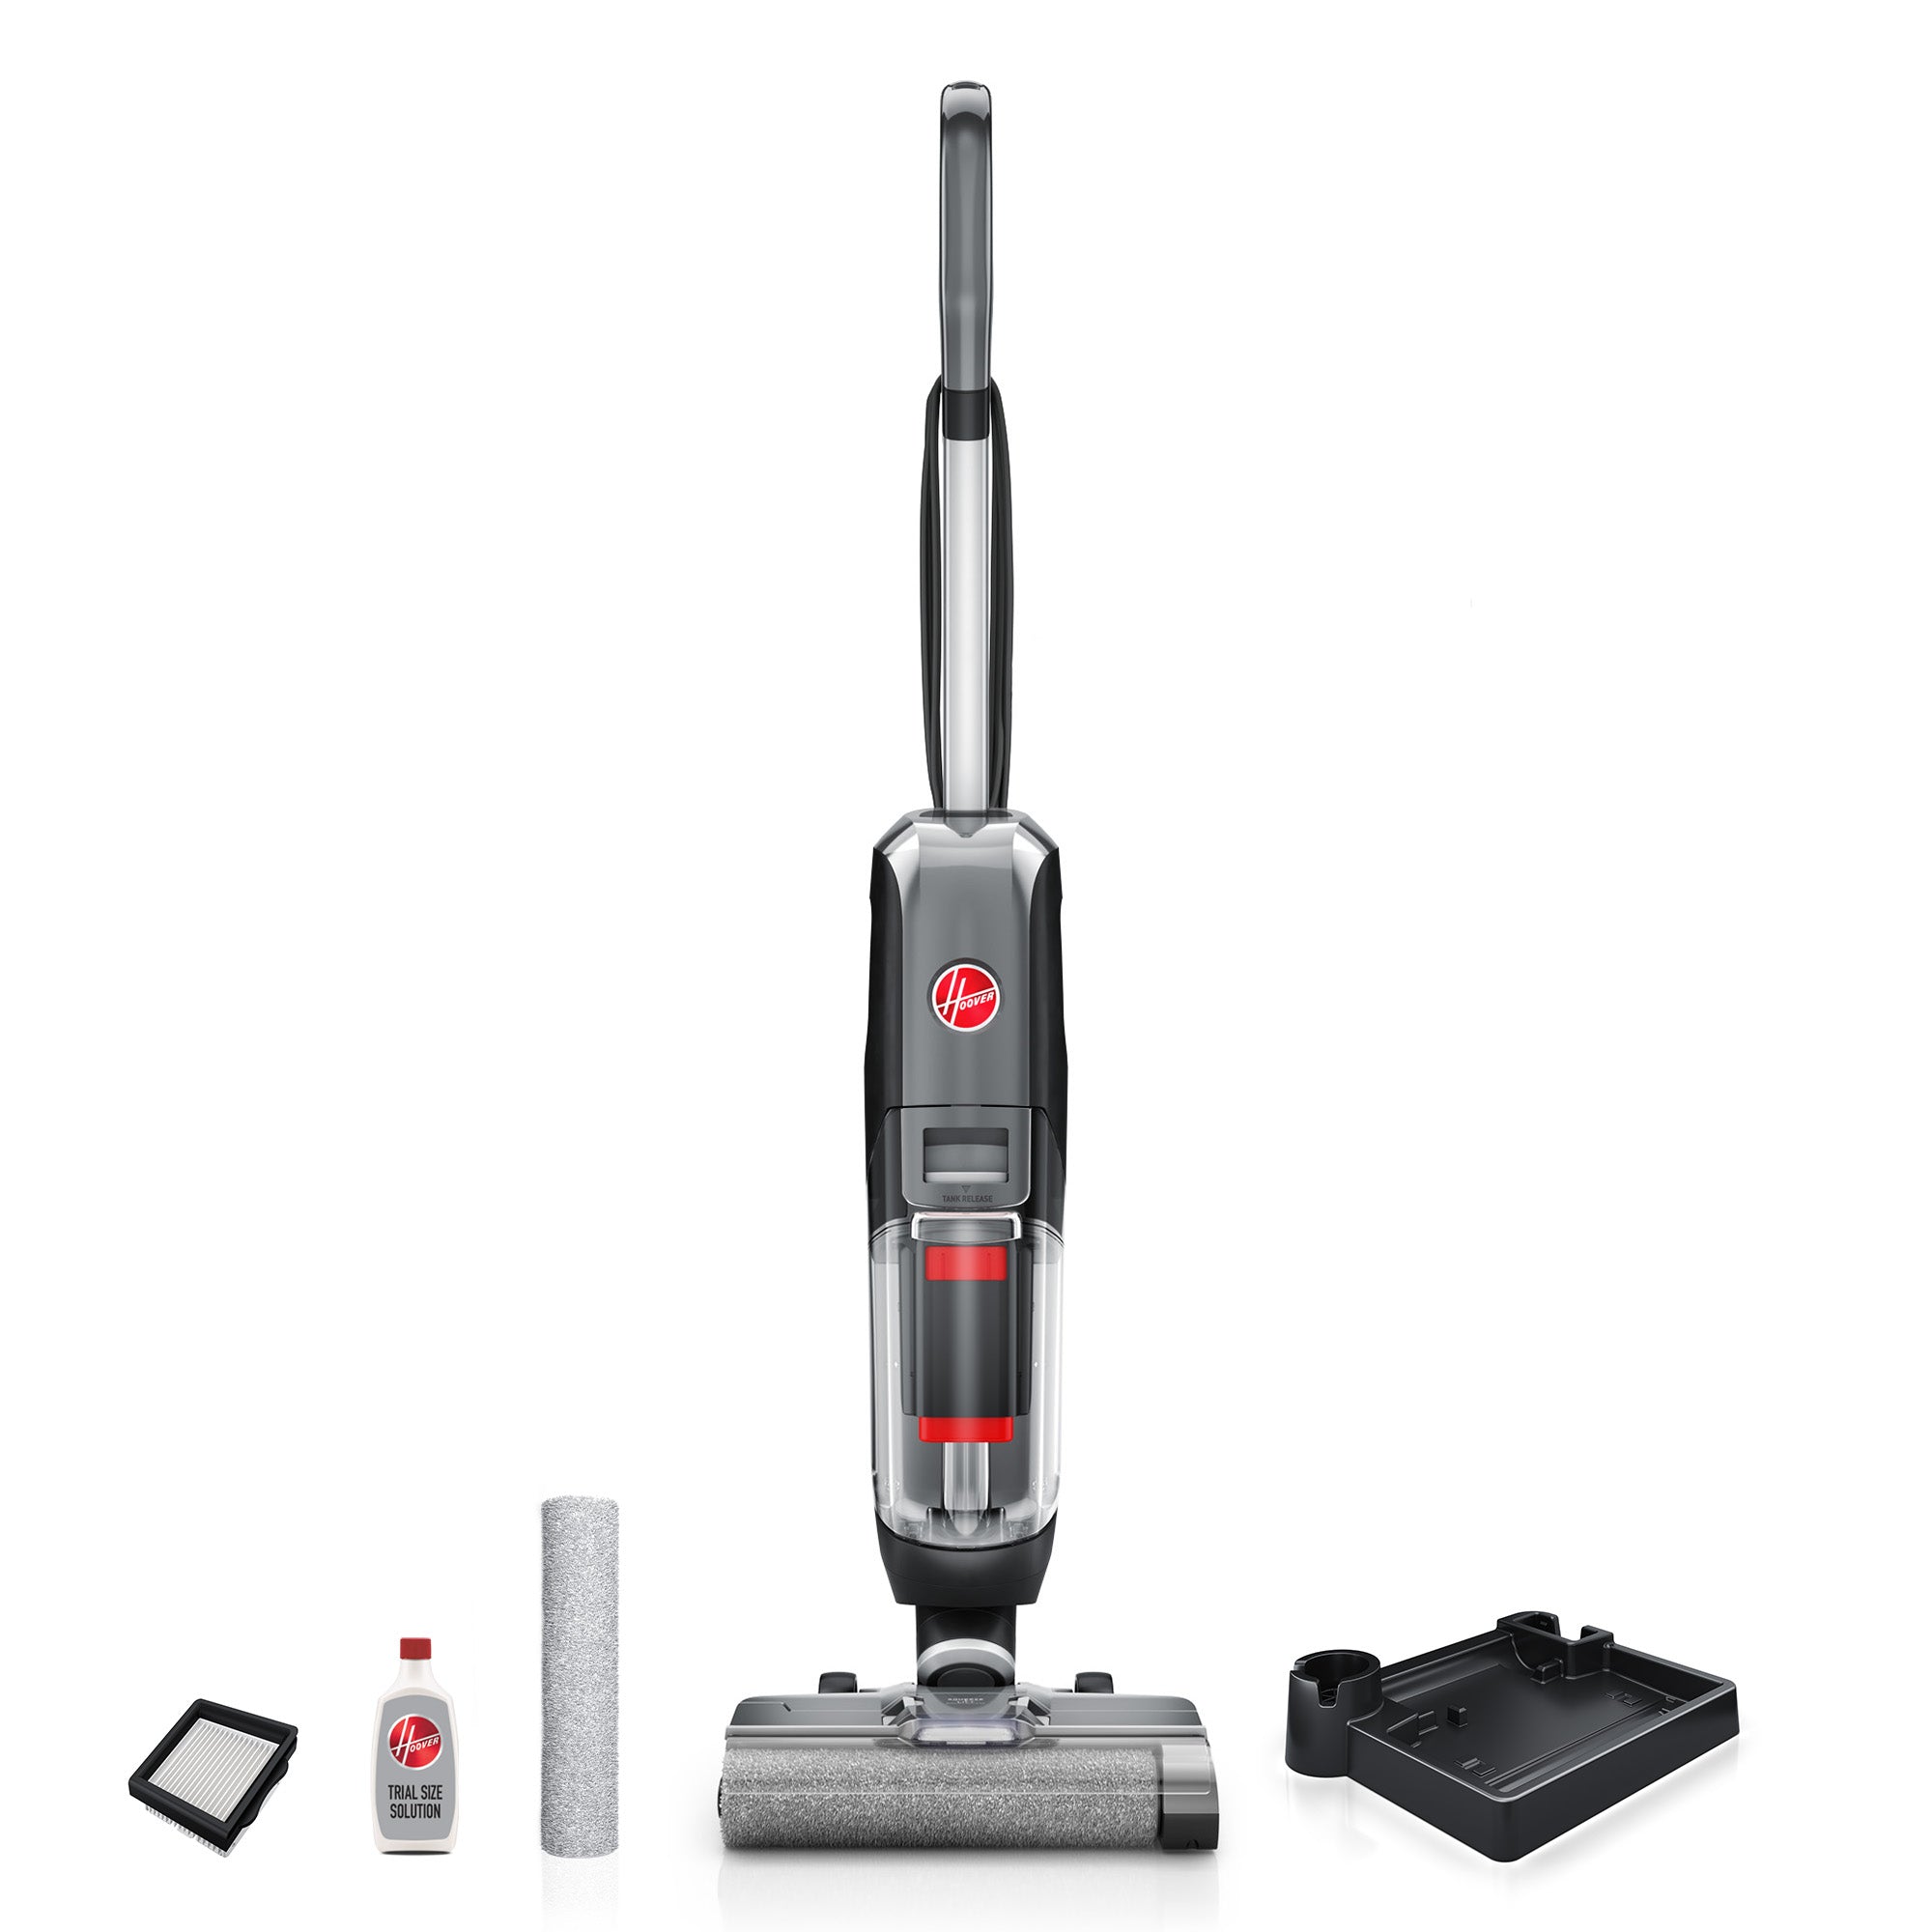 5 Best Steam Mop for Vinyl Floors in 2023, Tested and Reviewed